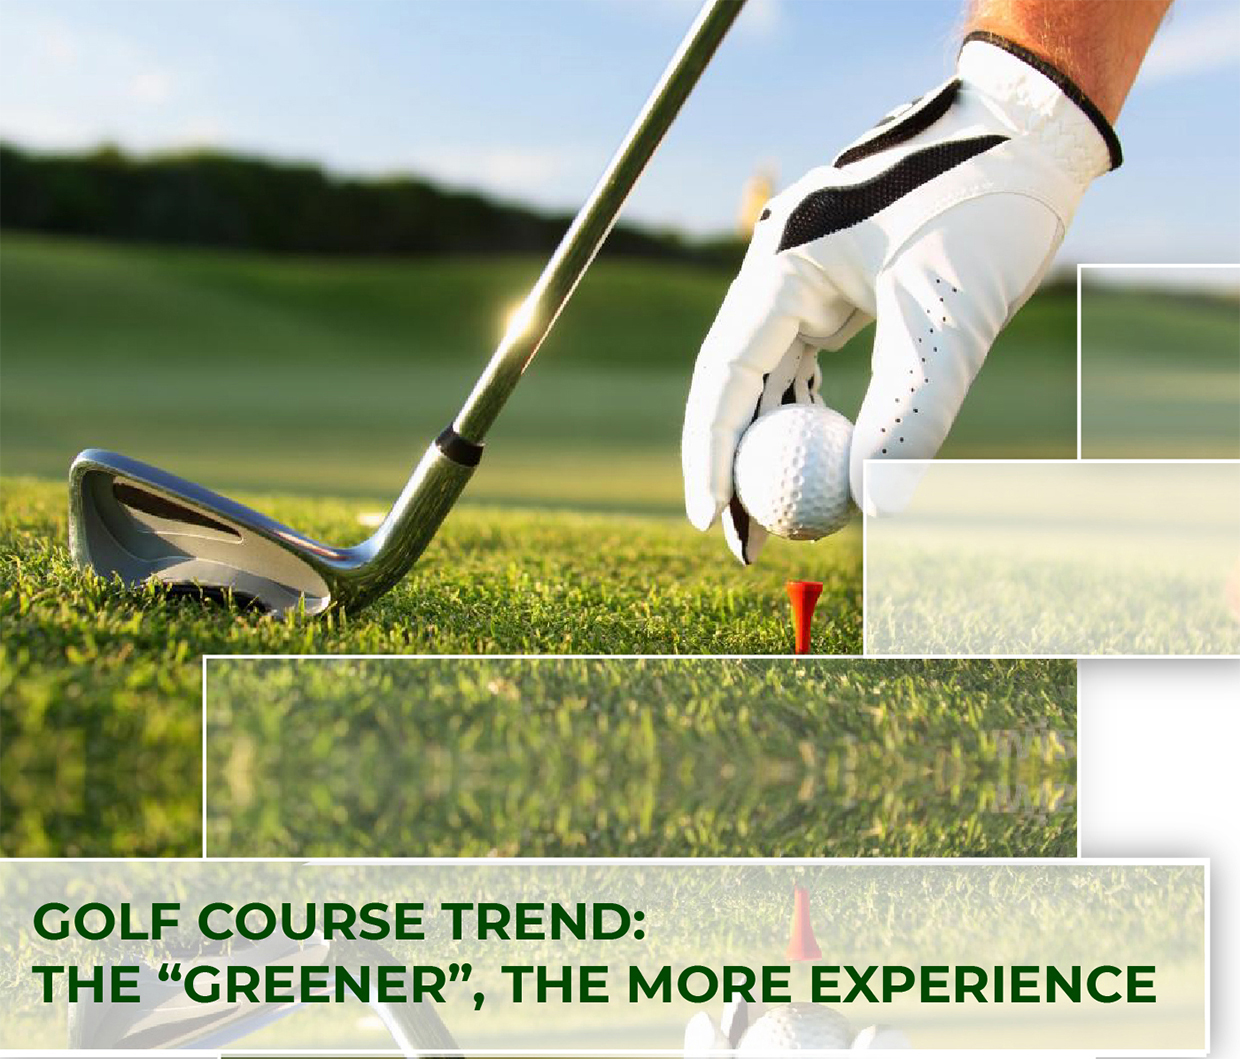 GOLF COURSE TREND: THE “GREENER”, THE MORE EXPERIENCE